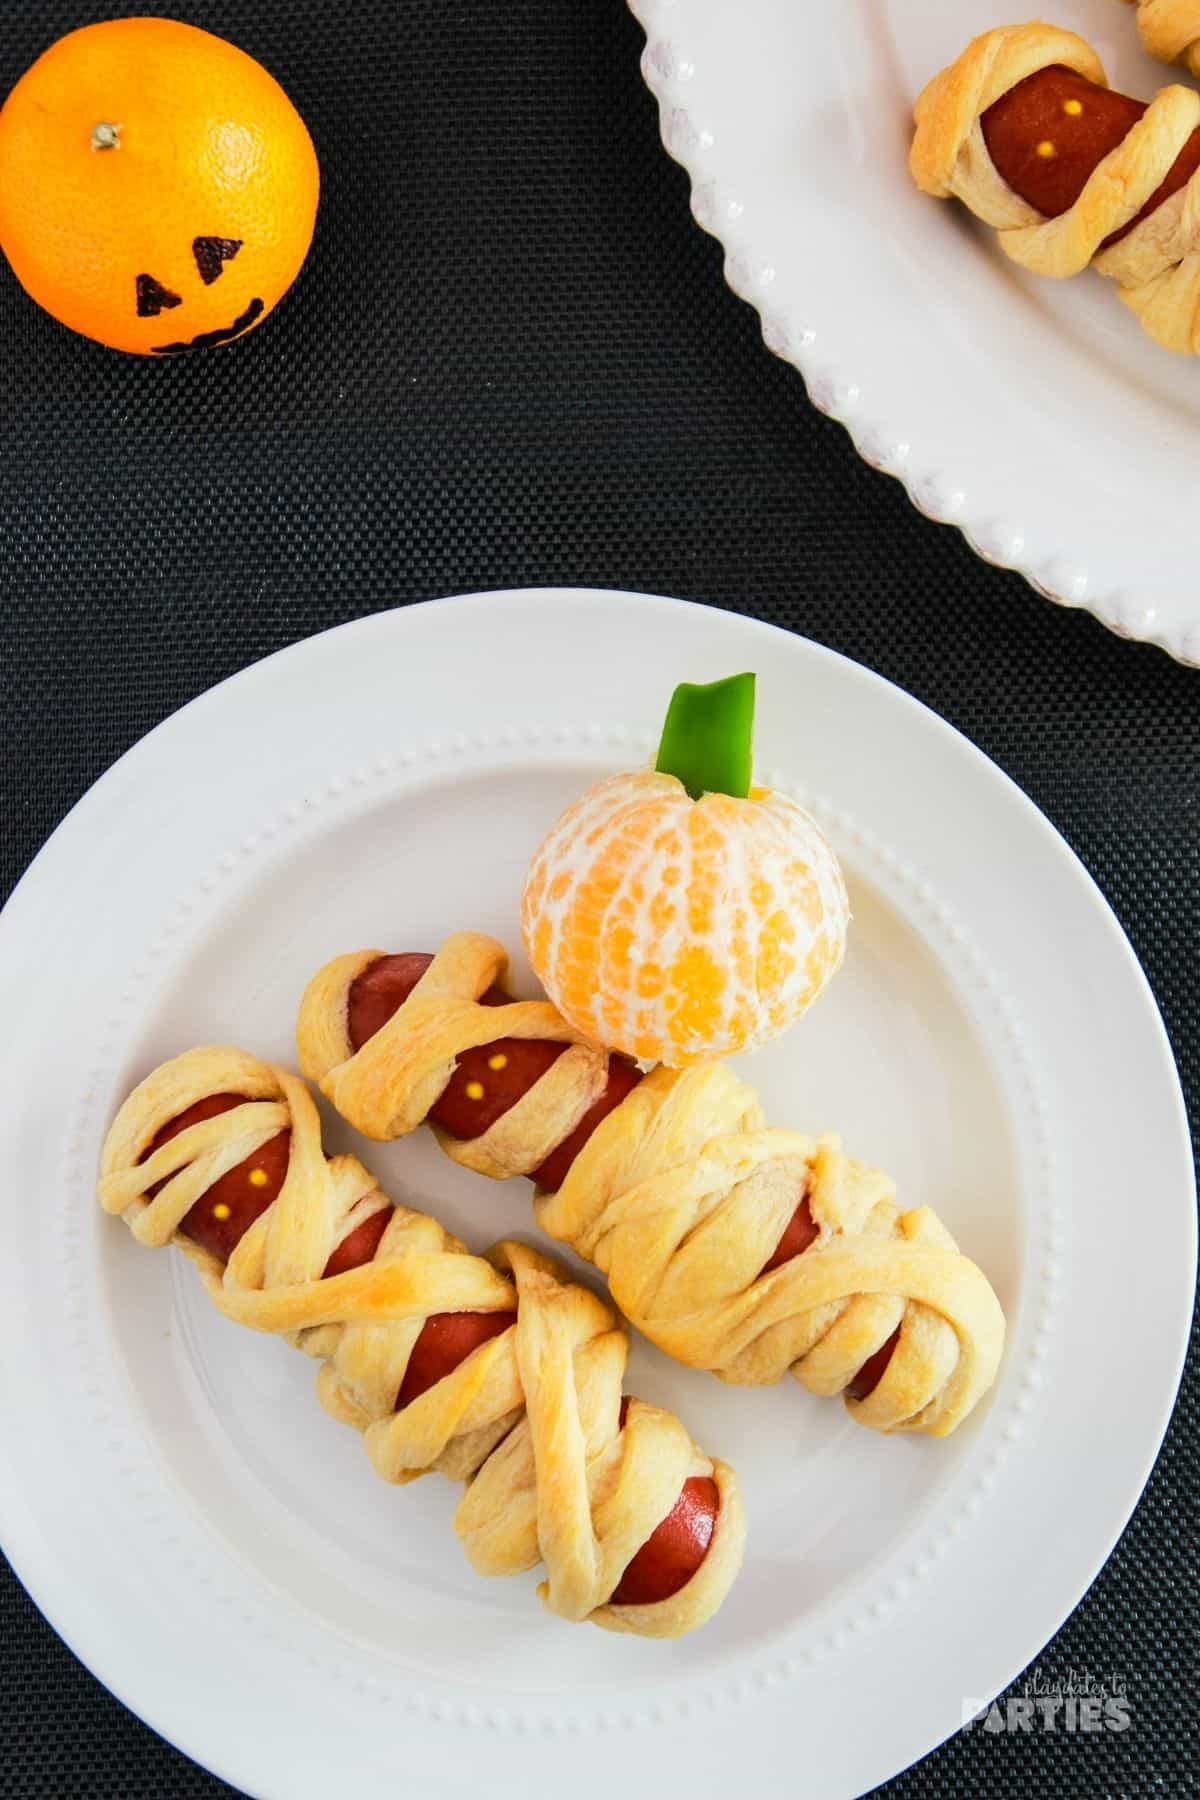 Mummy hot dogs on a plate with a clementine pumpkin.